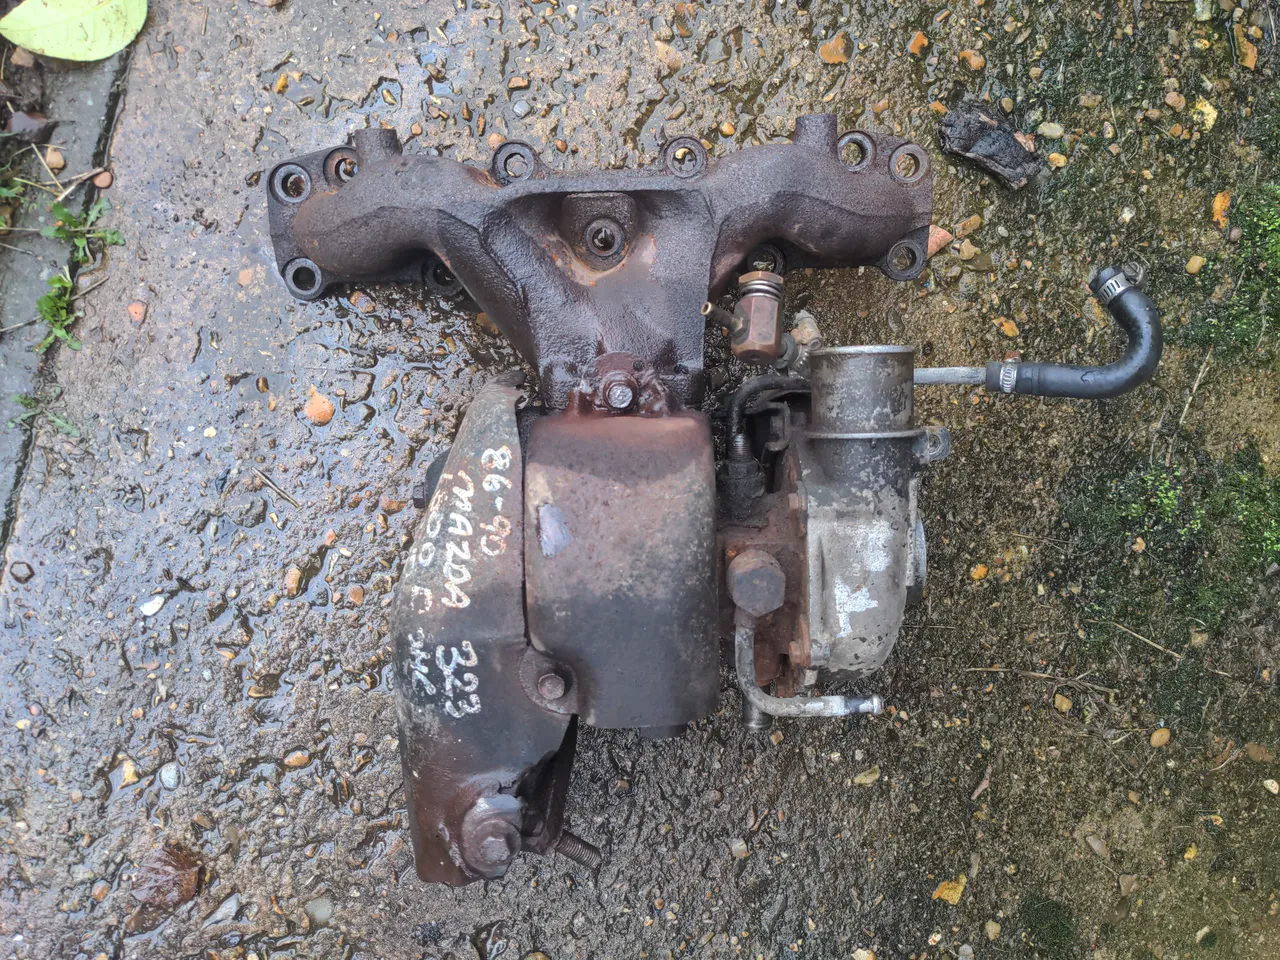 An IHI VJ9 turbo attached to an exhaust manifold. The parts that are not corroded are oily. It is as worn-out as it looks